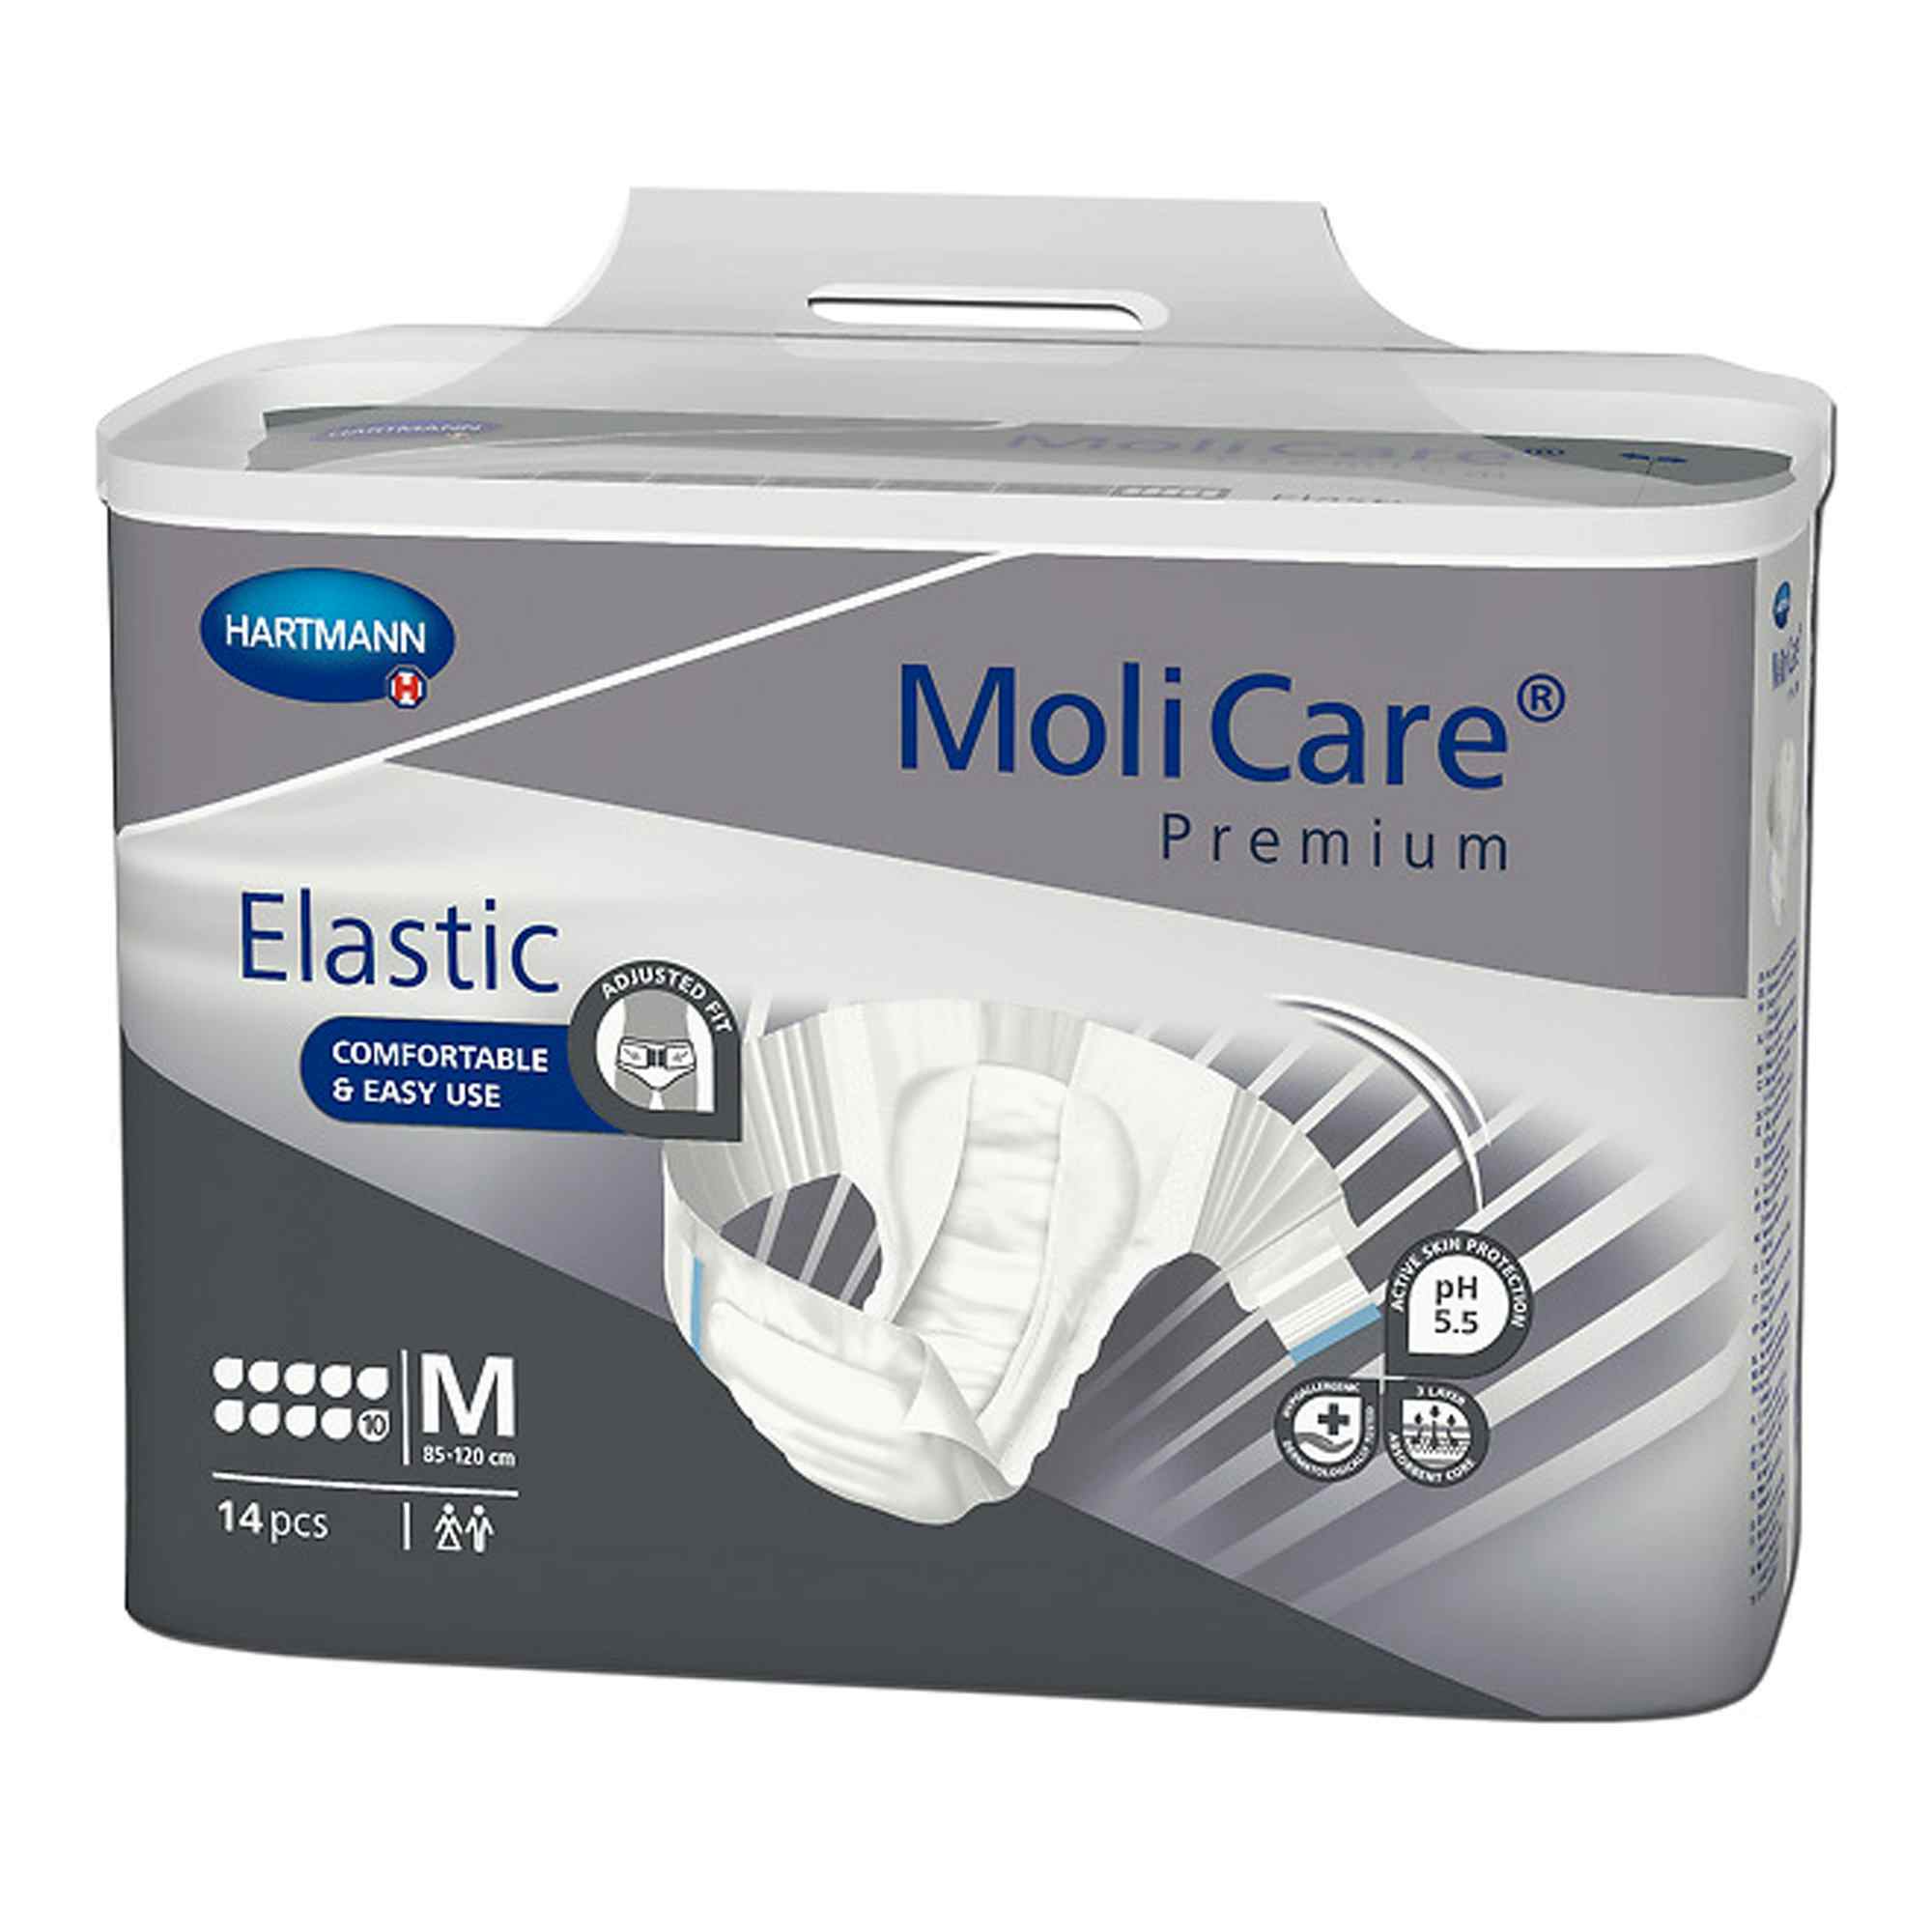 MoliCare Premium 10D Disposable Brief Adult Diapers with Tabs, Heavy Absorbency, 165672, Medium (33-47") - Case of 56